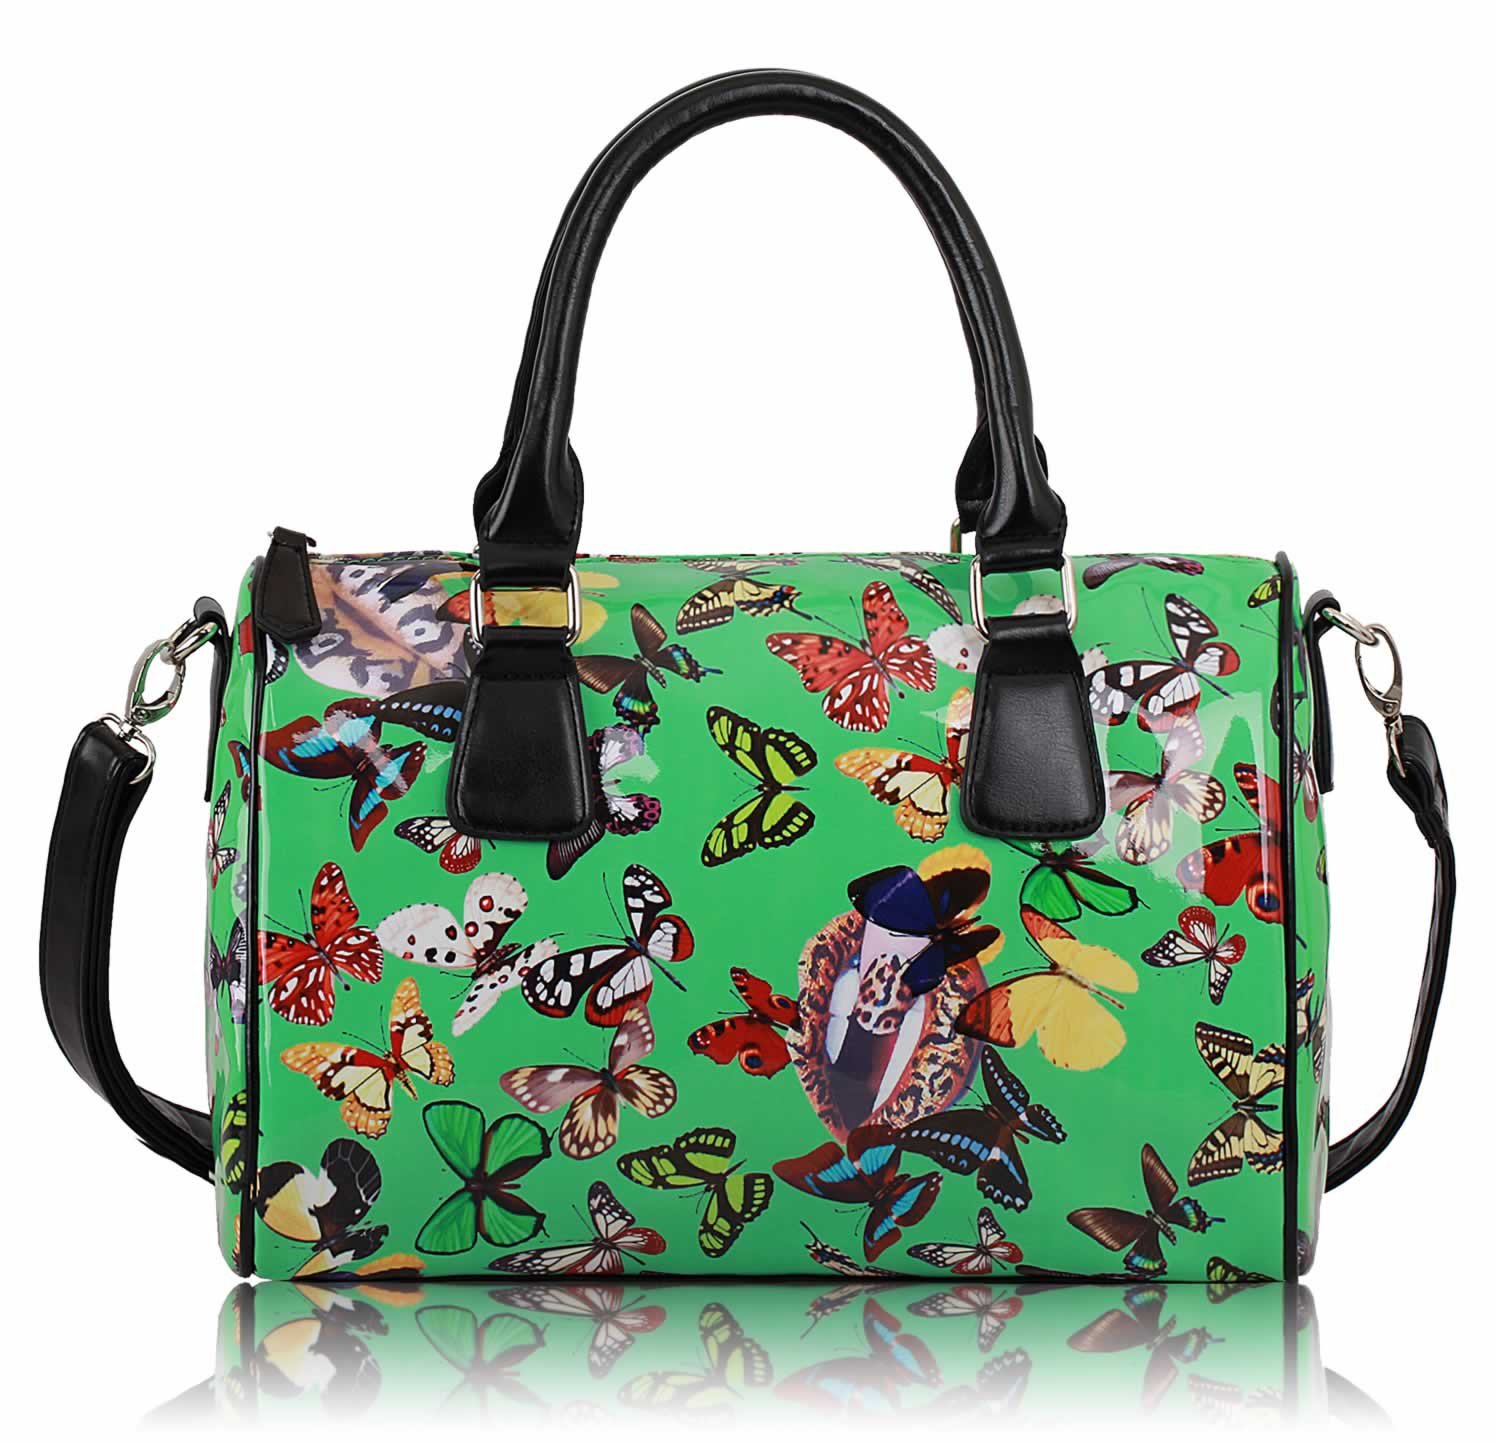 wholesale bags uk wholesale bags Wholesale & B2B Green Butterfly Tote ...